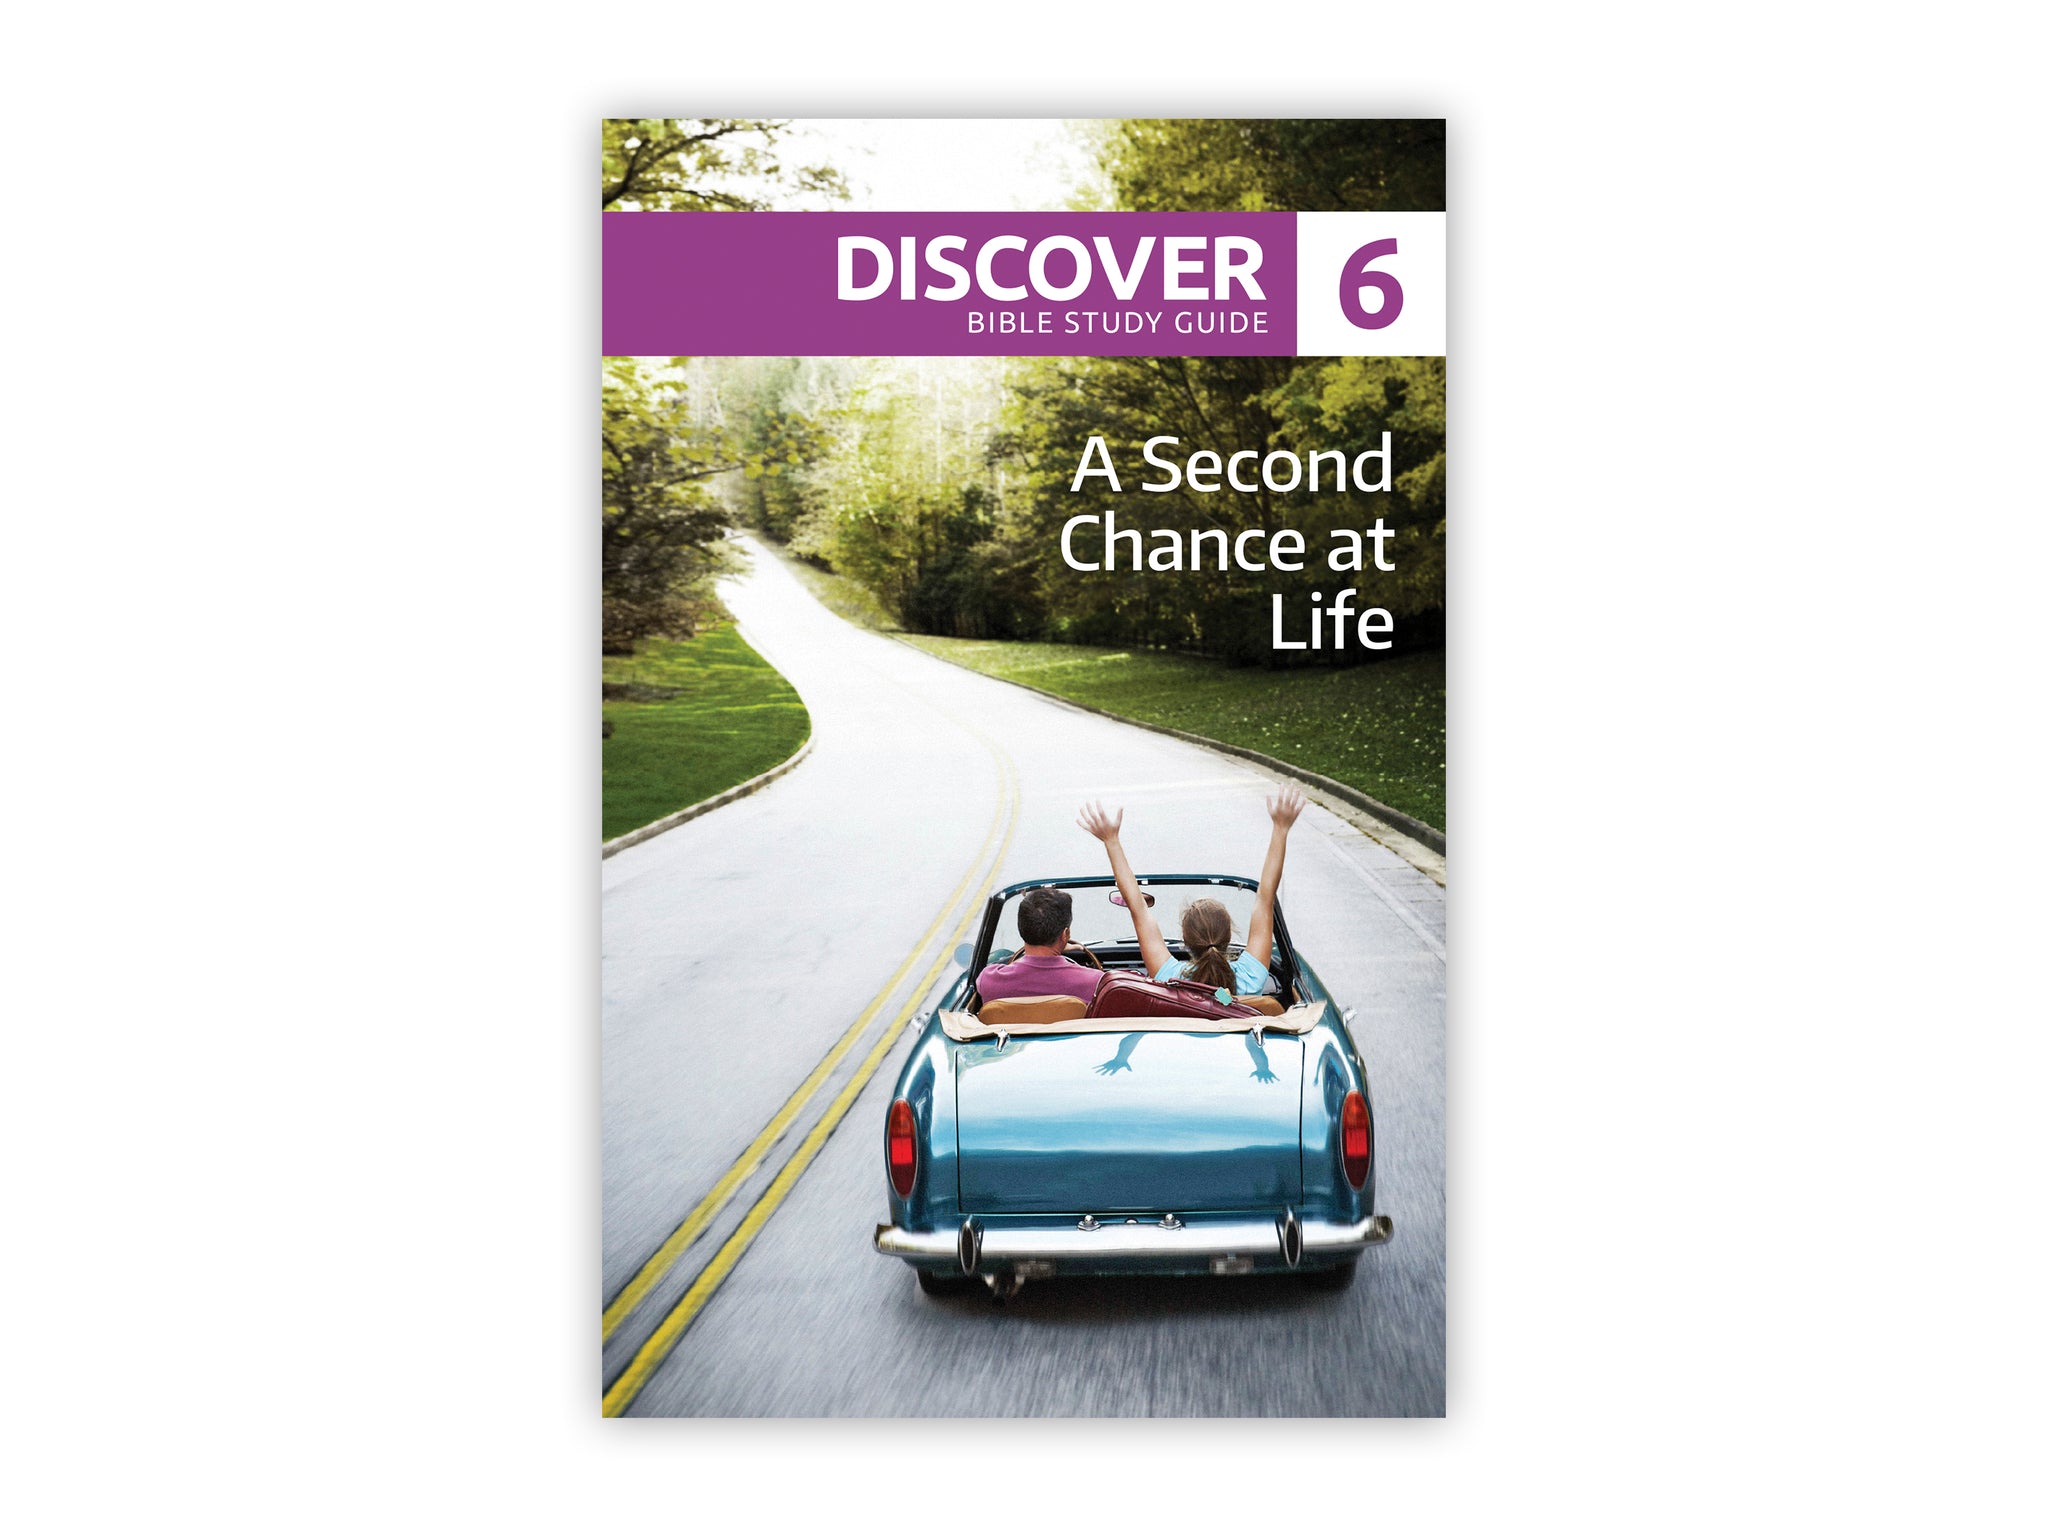 Discover Bible Study Guide #6 - A Second Chance at Life